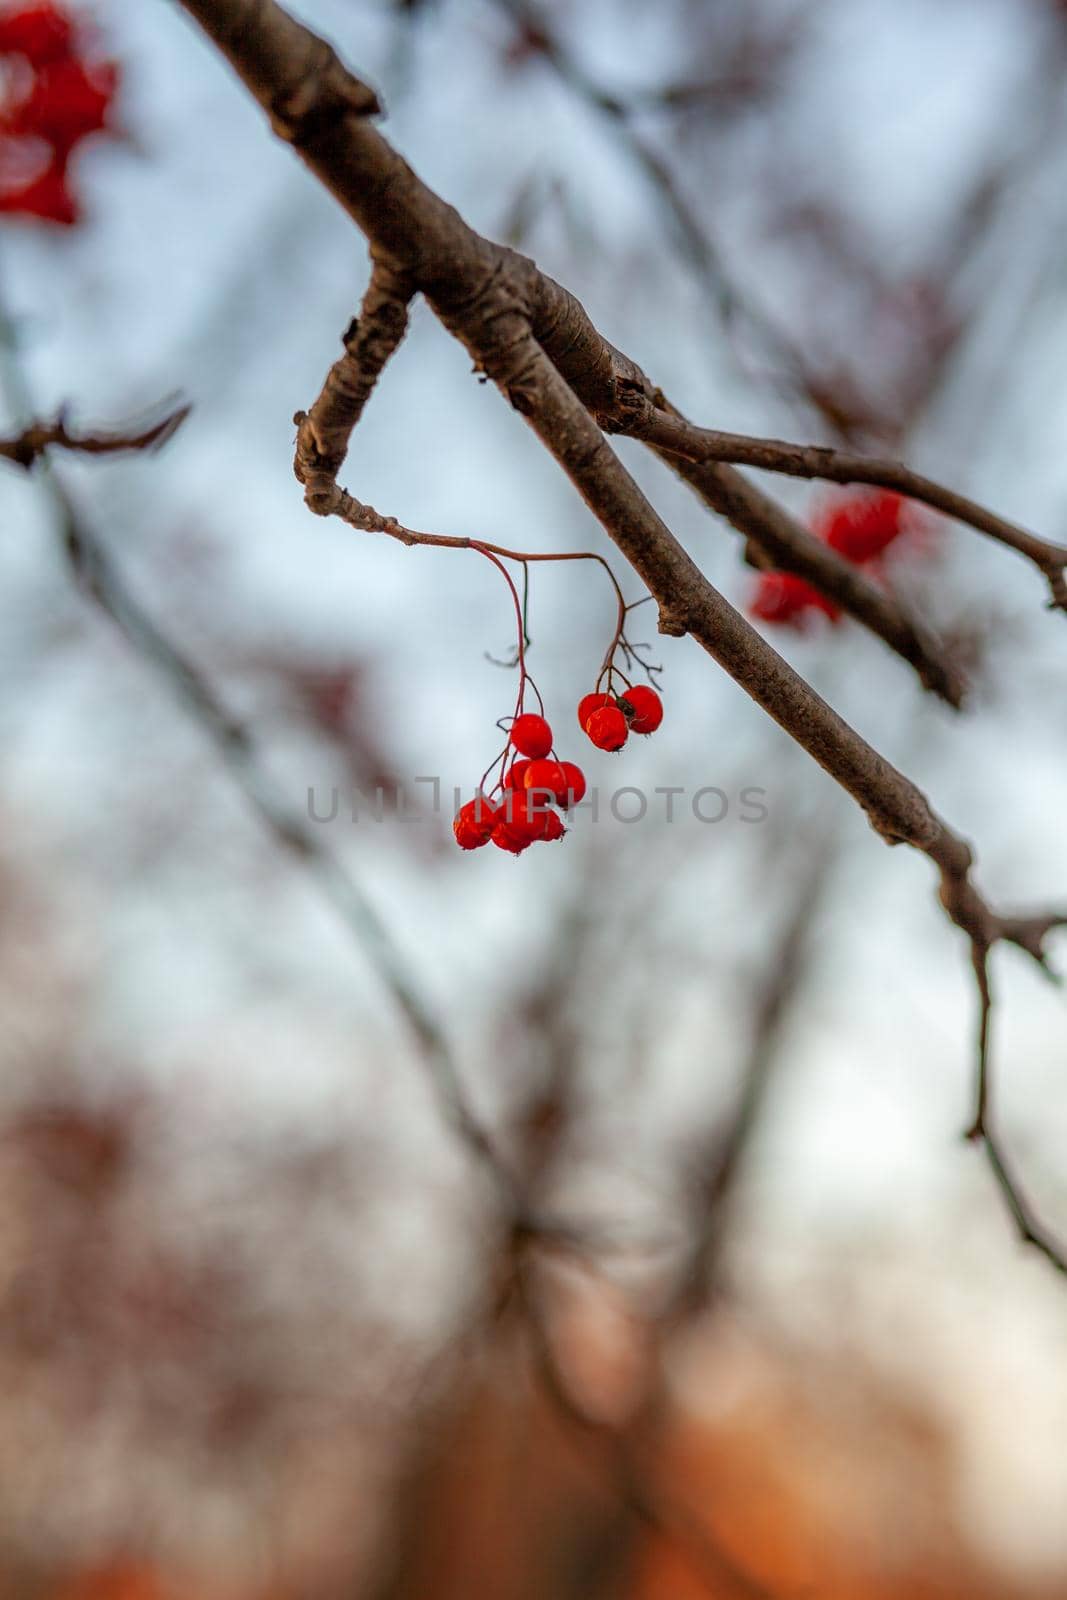 Berries of mountain ash branches are red on a blurry autumn background. Autumn harvest still life scene. Soft focus backdrop photography. Copy space.